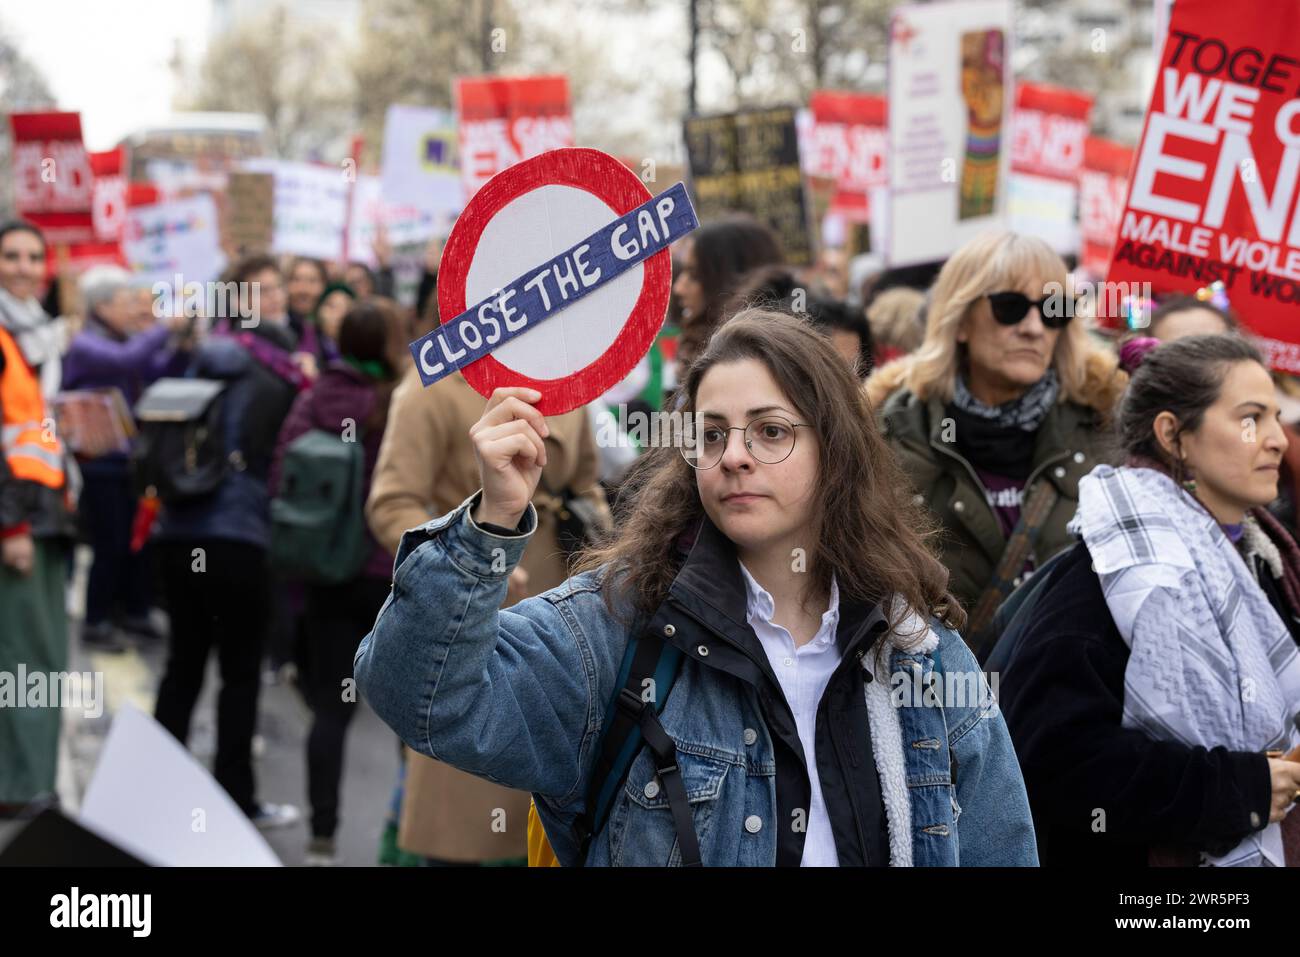 Million Women Rise 2024 organised march against male violence on Saturday 08th March to coincide with International Women's Day. Stock Photo